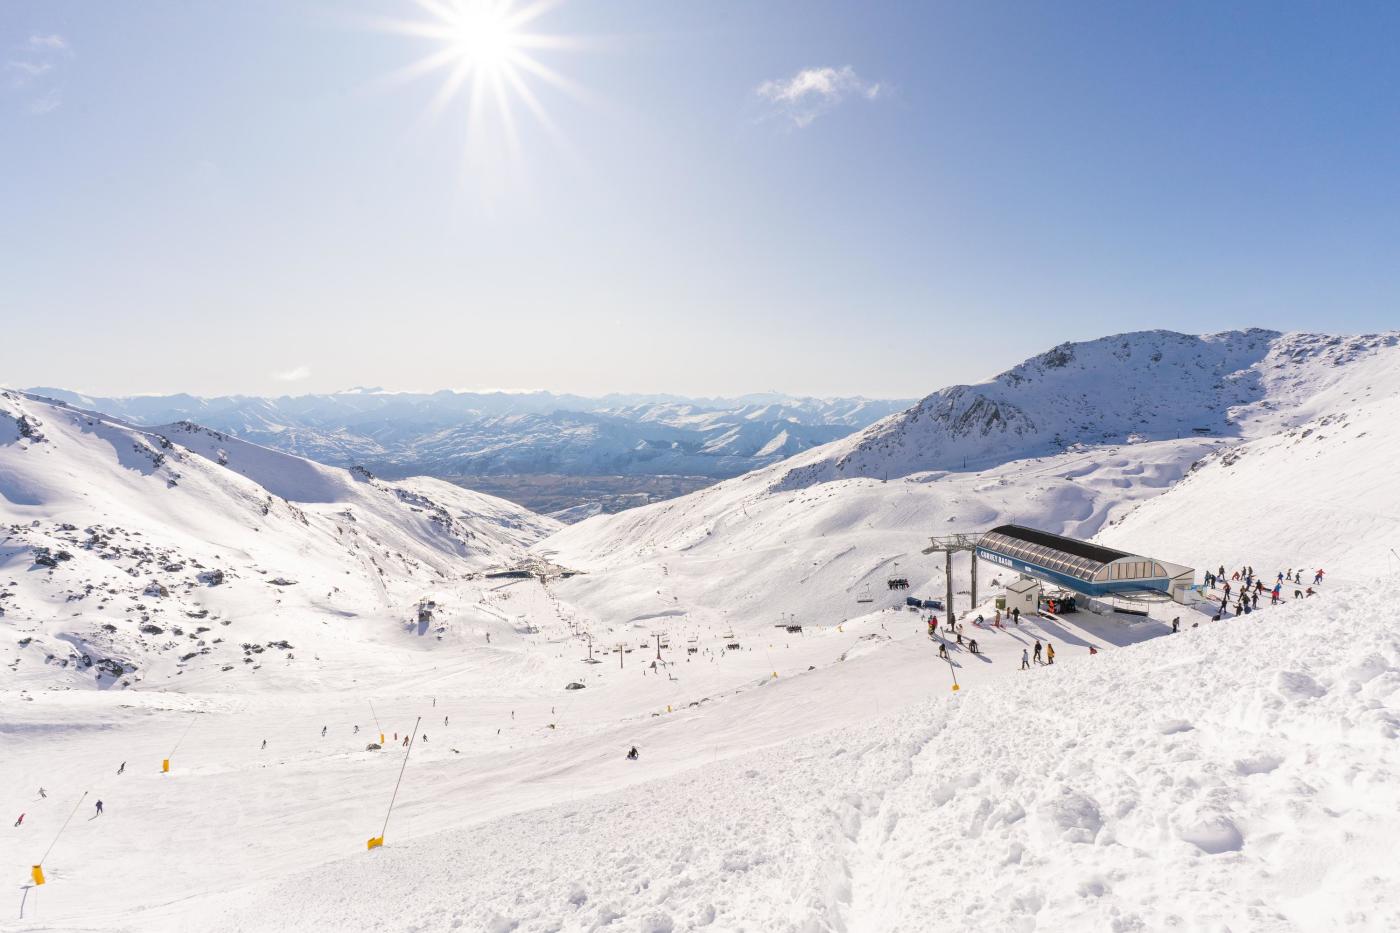 View of The Remarkables Ski Area